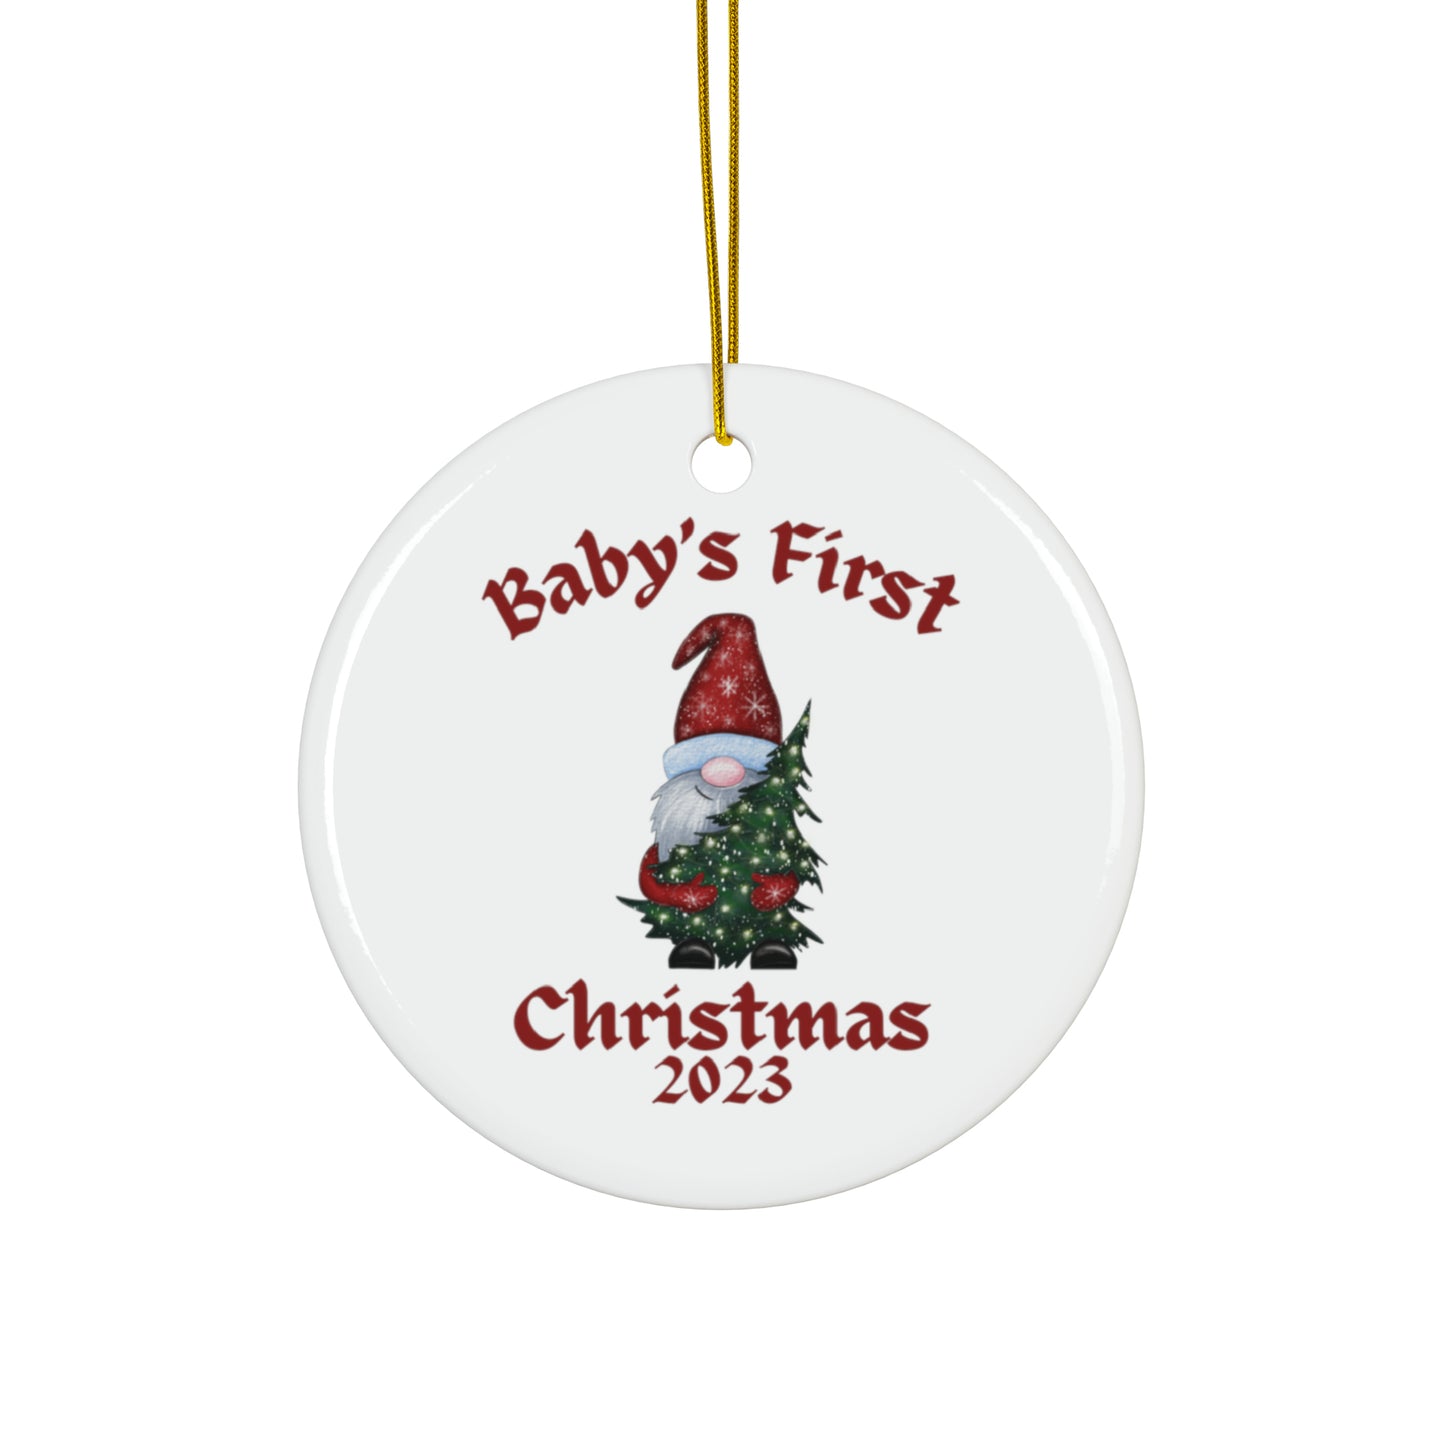 Baby's First Christmas Ceramic Ornament | Cute Christmas Decoration | Baby's First Christmas Gift